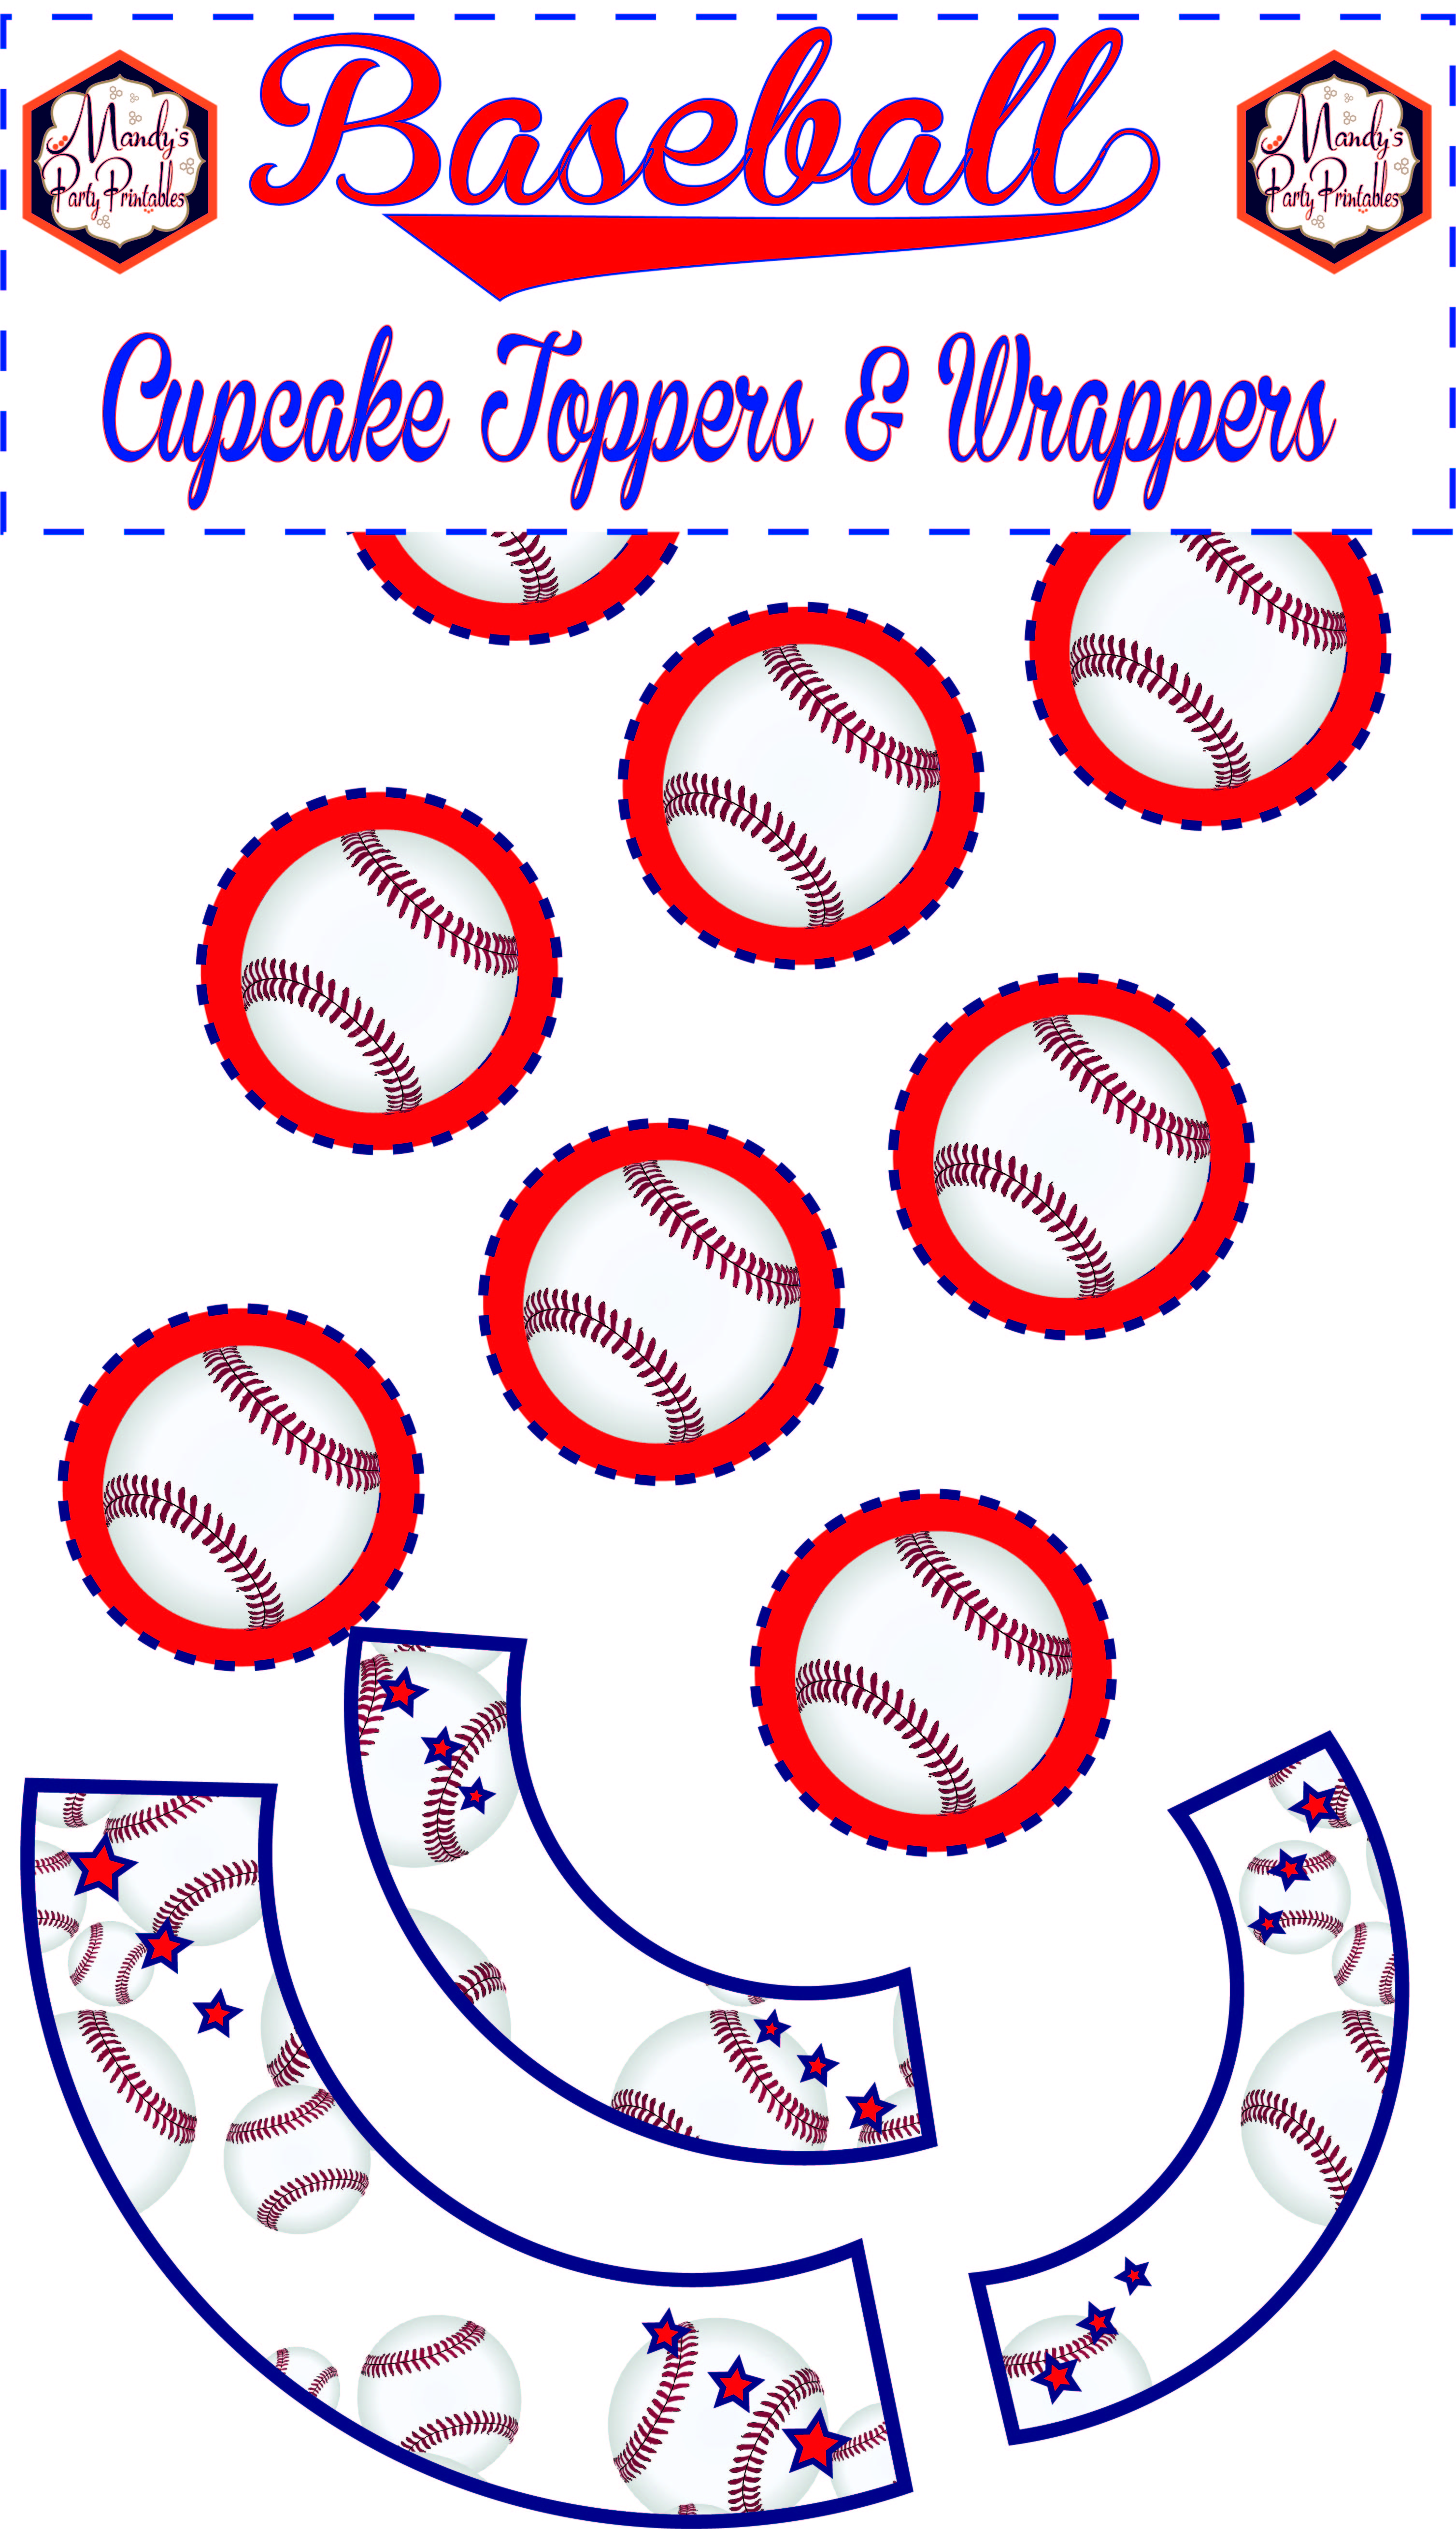 Free Baseball Cupcake Toppers & Wrappers via Mandy's Party Printables